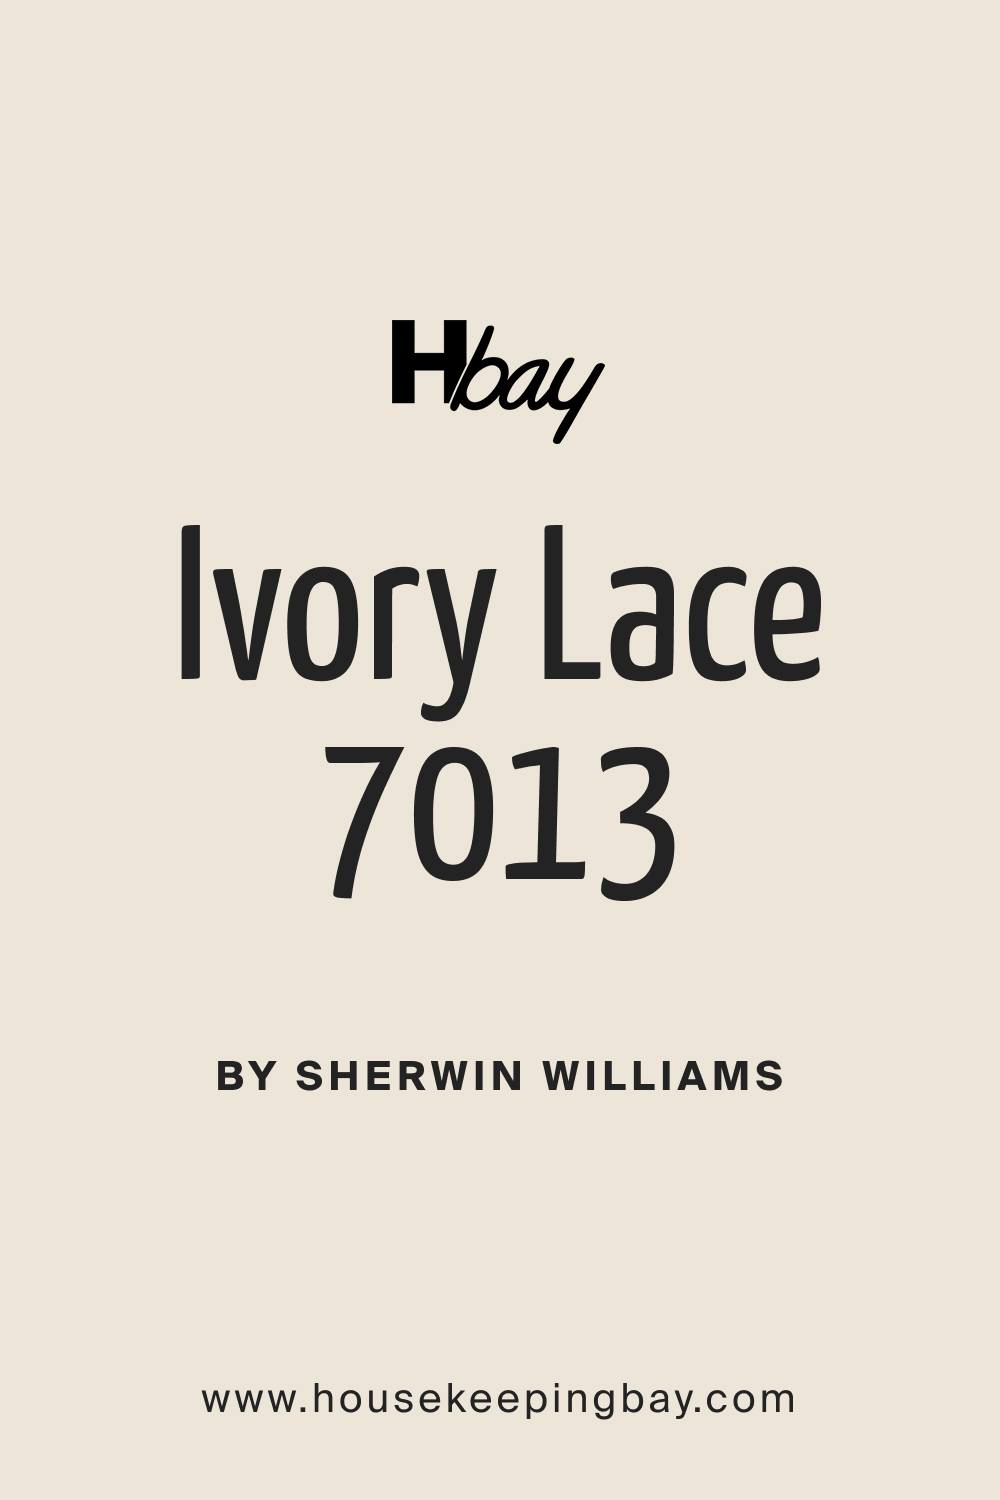 Sherwin Williams SW 7013 Ivory Lace Paint Color